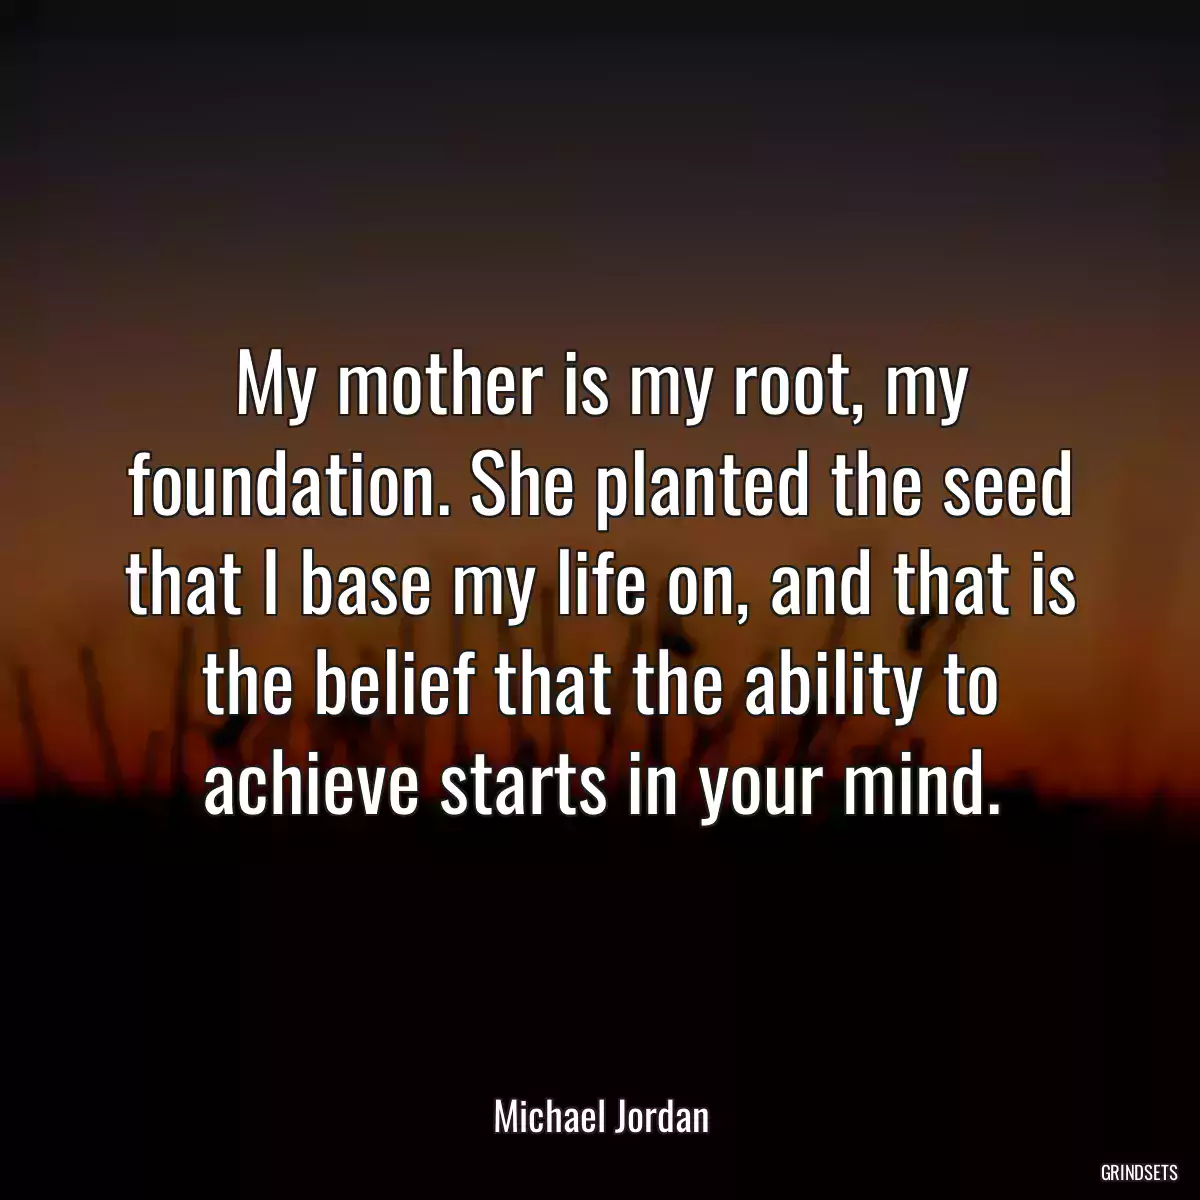 My mother is my root, my foundation. She planted the seed that I base my life on, and that is the belief that the ability to achieve starts in your mind.